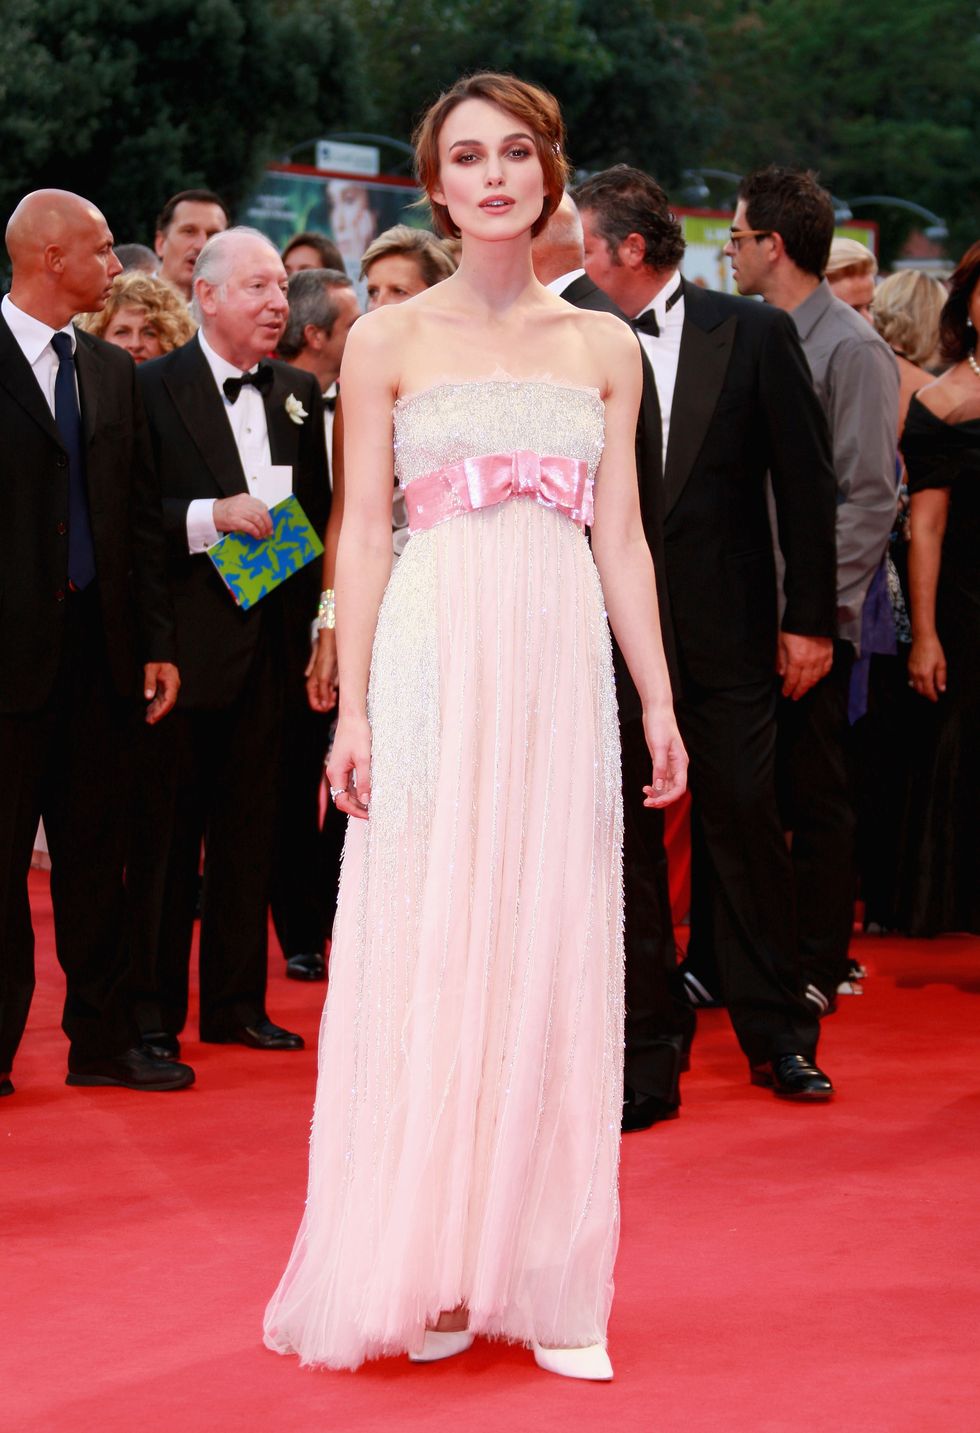 64th venice film festival opening ceremony and the atonement premiere